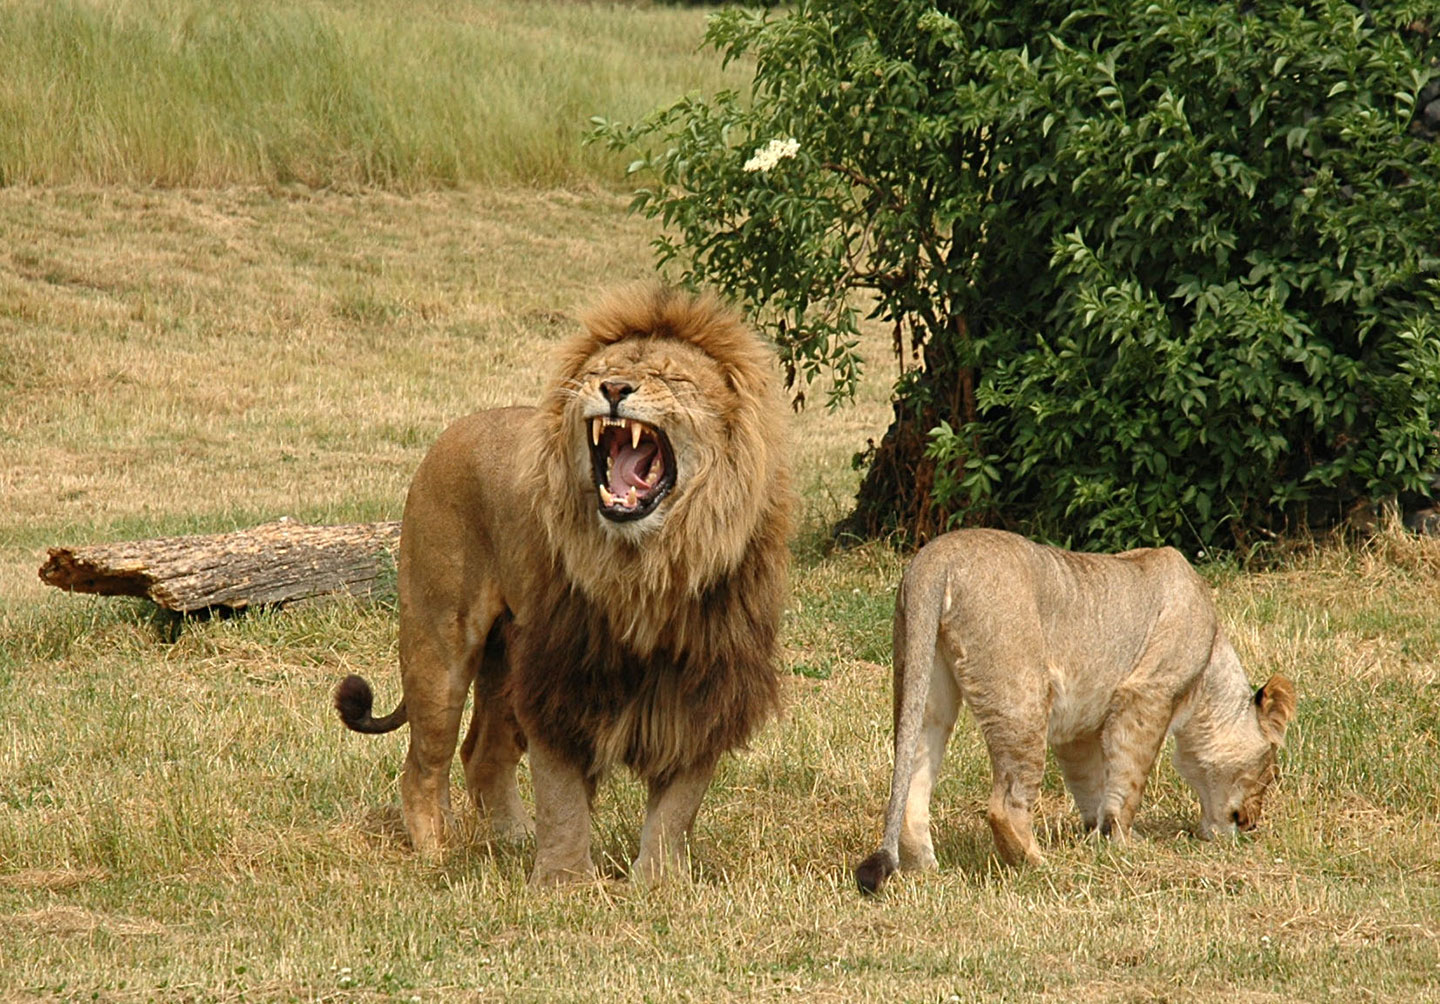 A roaring lion with a lioness